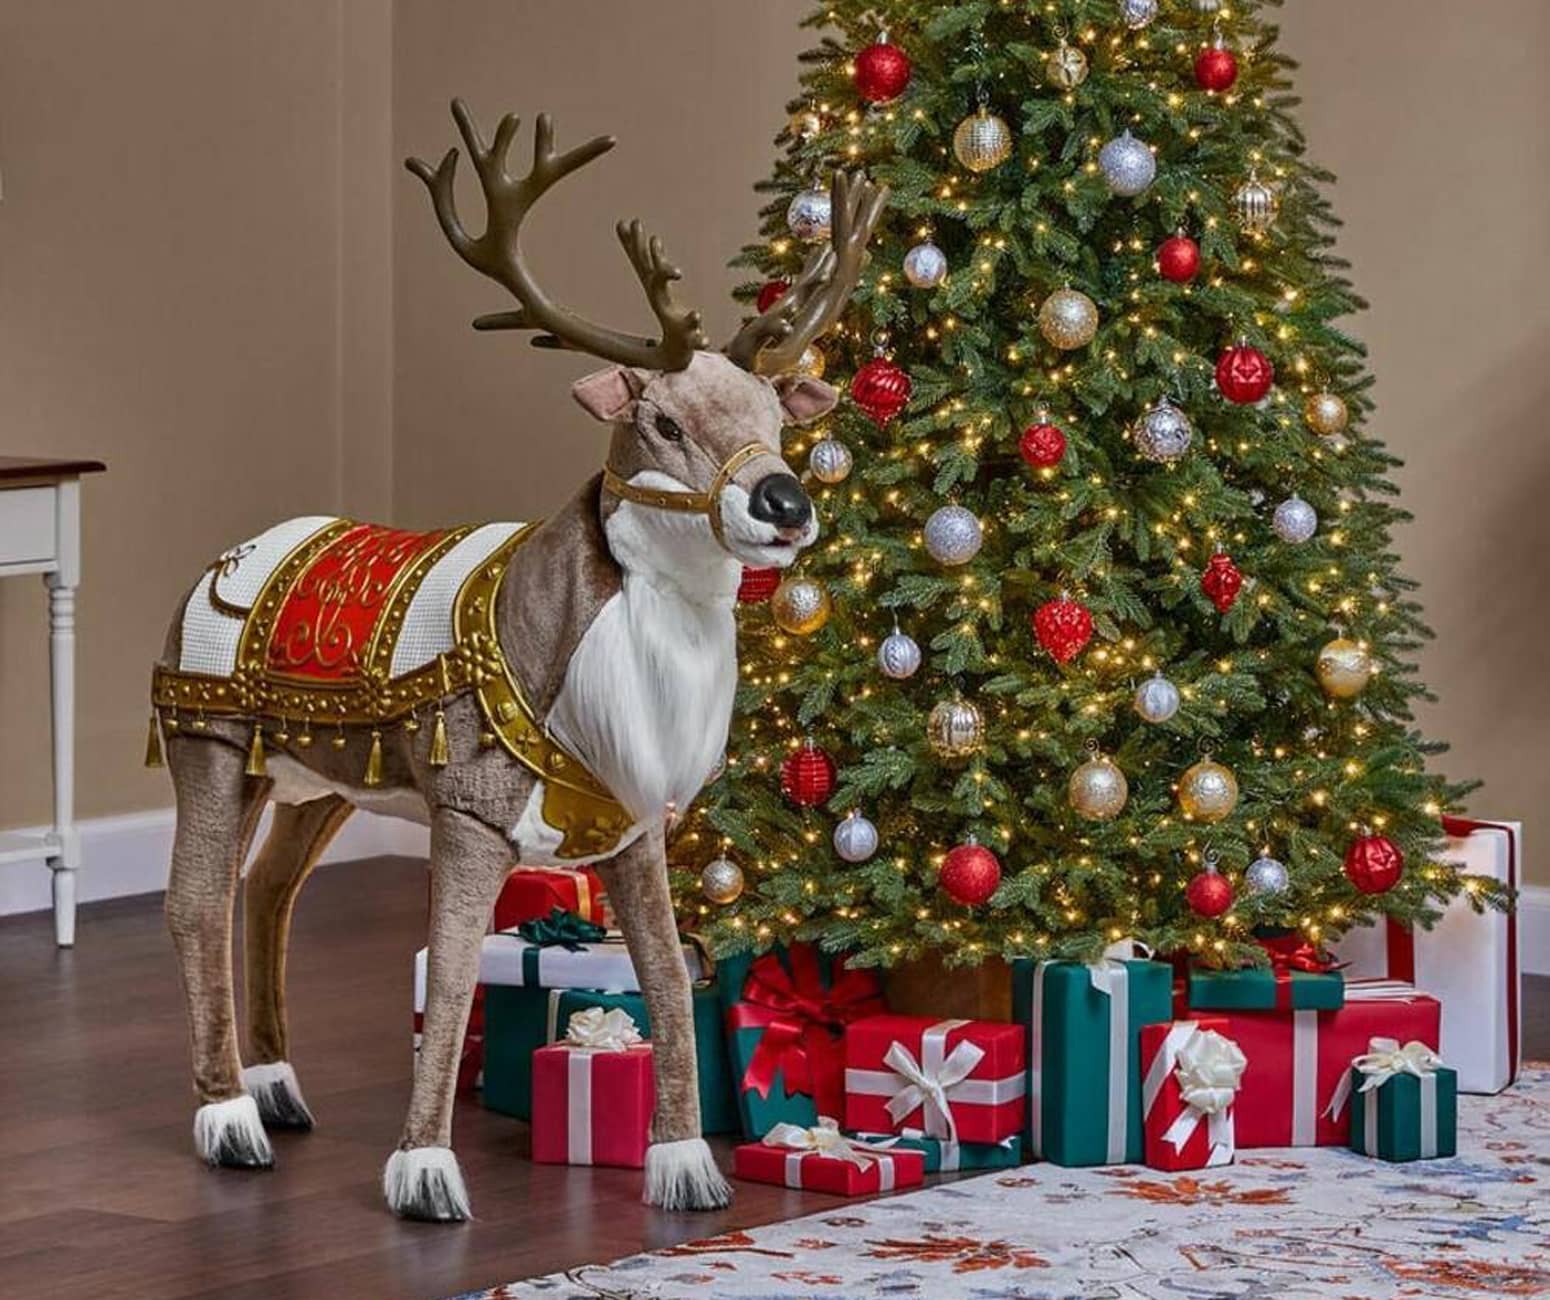 Life-Sized Animated Reindeer Statue | The Green Head